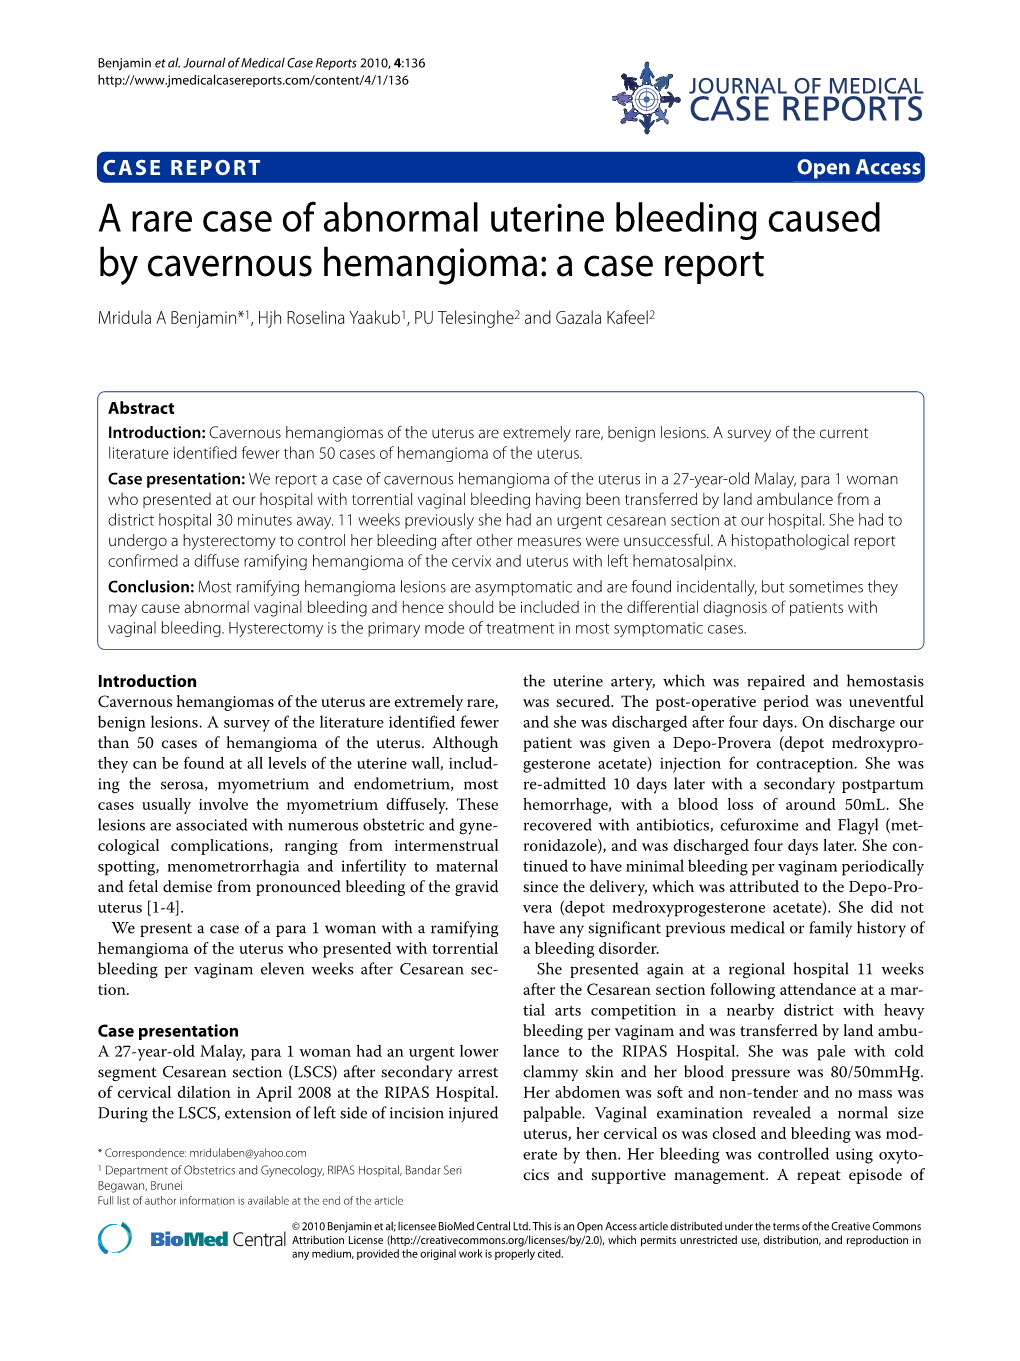 A Rare Case of Abnormal Uterine Bleeding Caused By